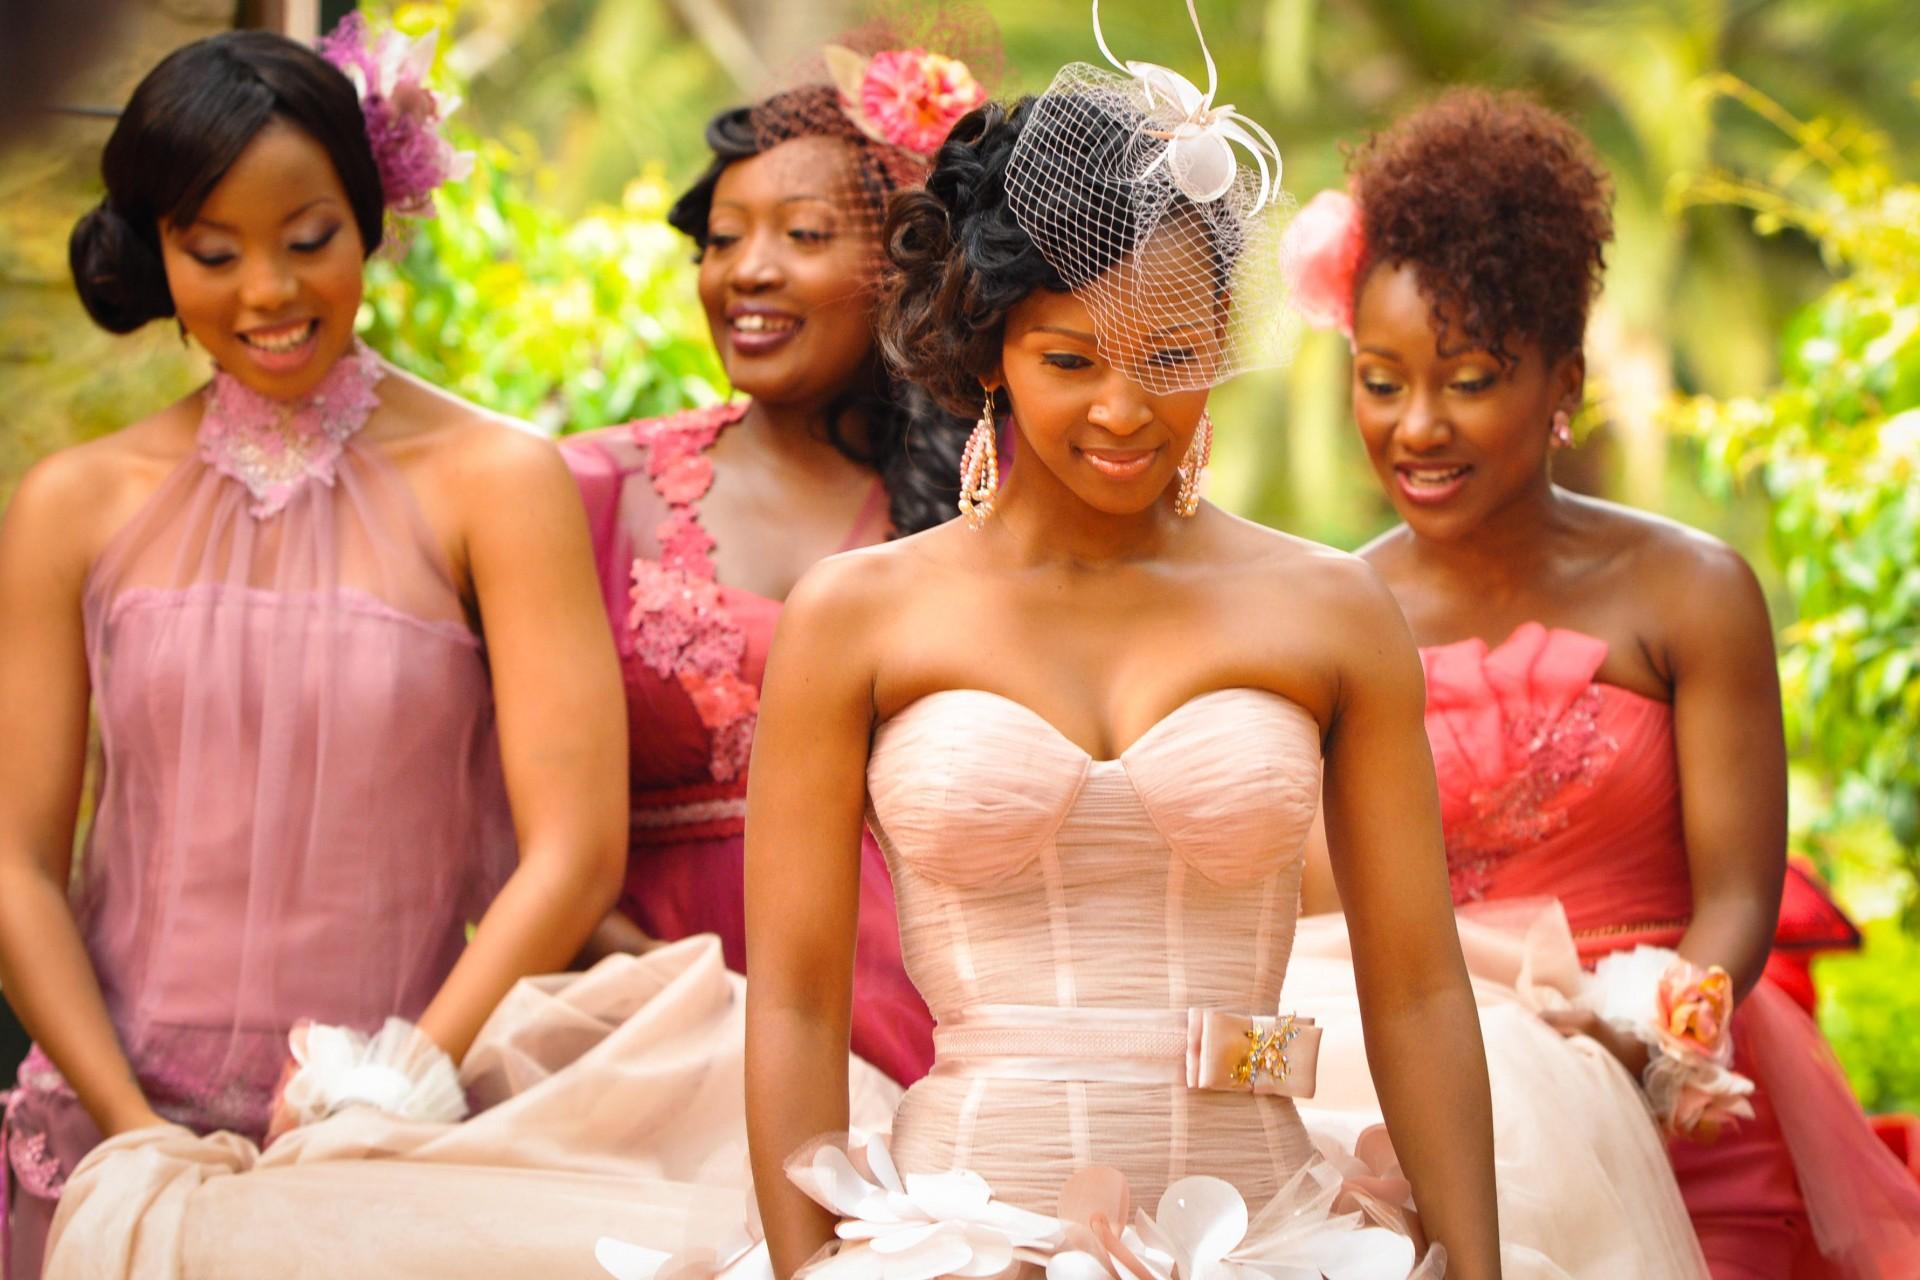 A wedding scene from South African soap opera 'Generations'.